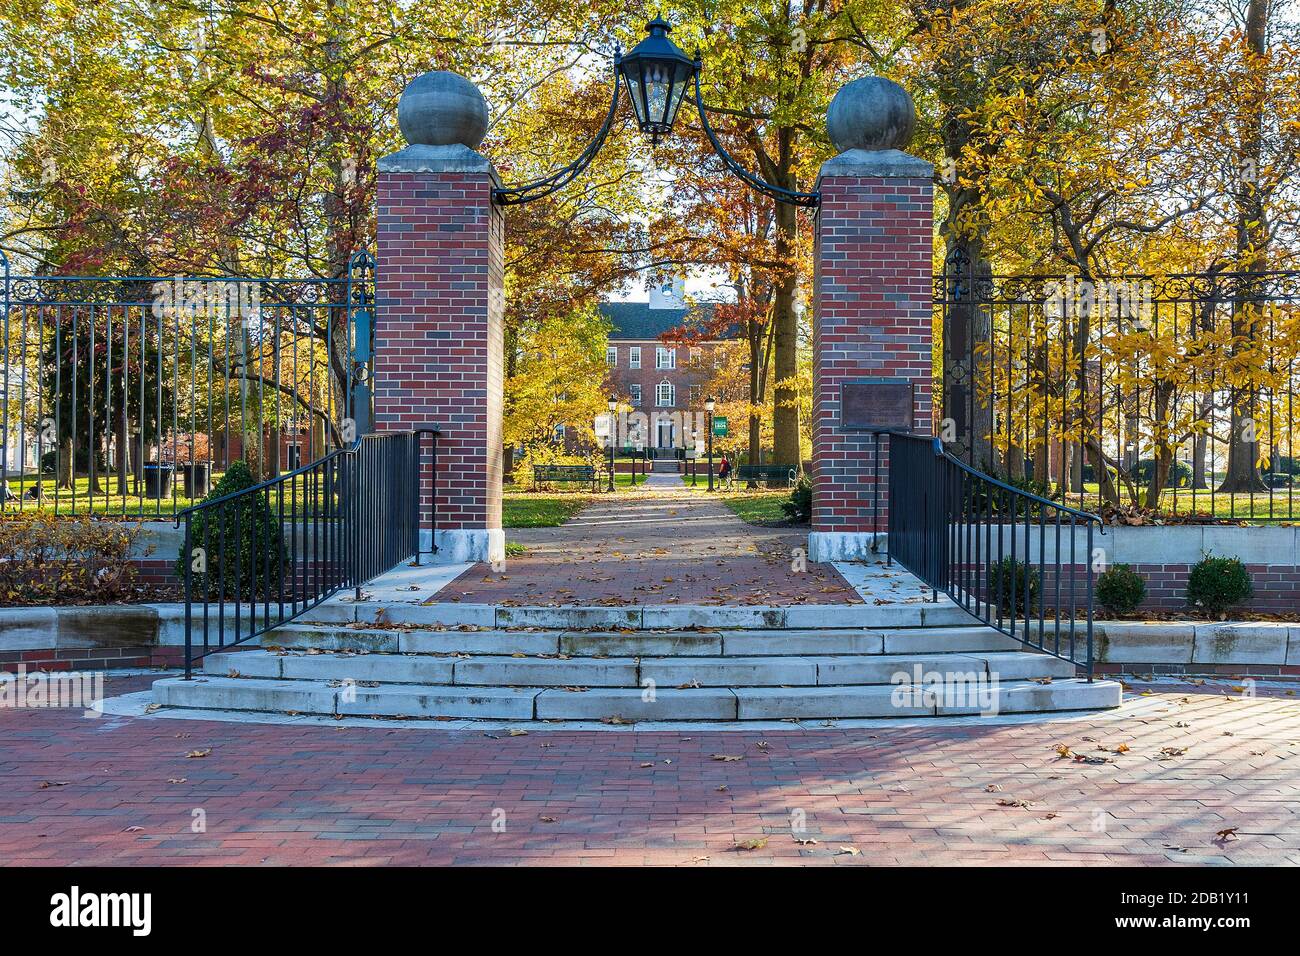 https://c8.alamy.com/comp/2DB1Y11/athens-oh-usa-november-6-college-green-and-class-gateway-on-november-6-2020-at-ohio-university-in-athens-ohio-2DB1Y11.jpg